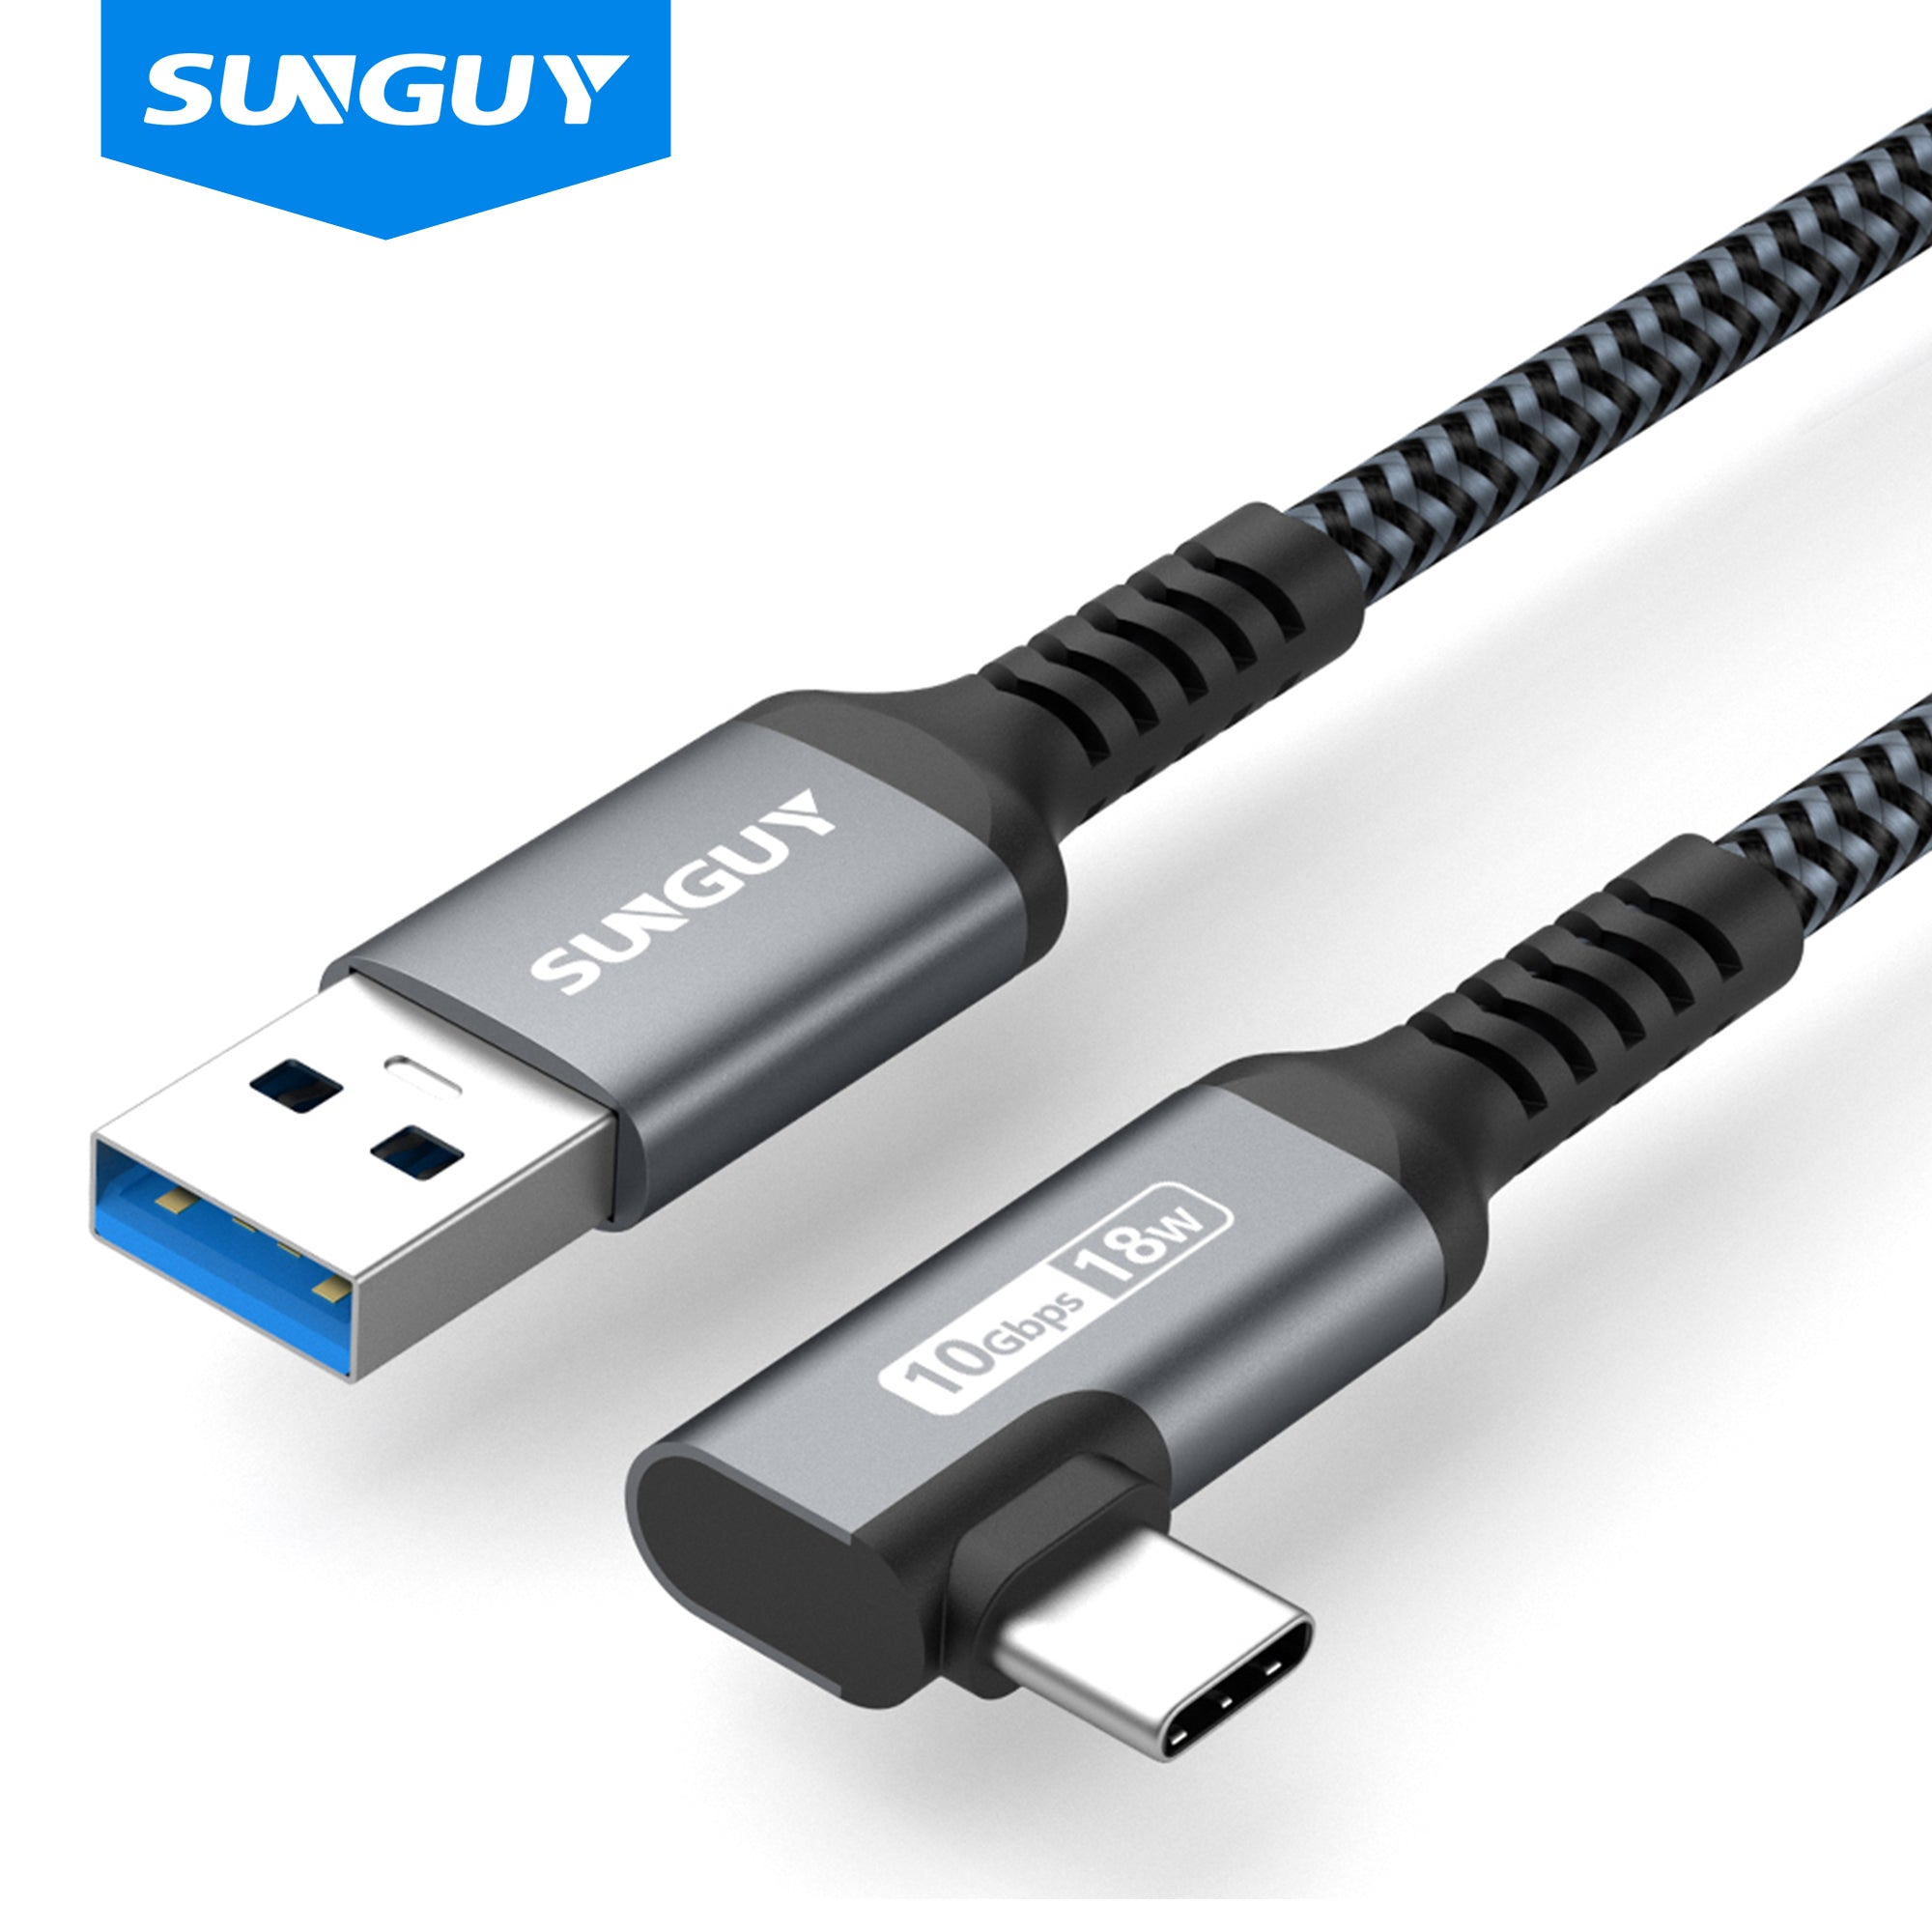 SUNGUY USB C 3.1 Gen 2 to USB A Cable,Right Angle 10Gbps USB to USB C B040AC#